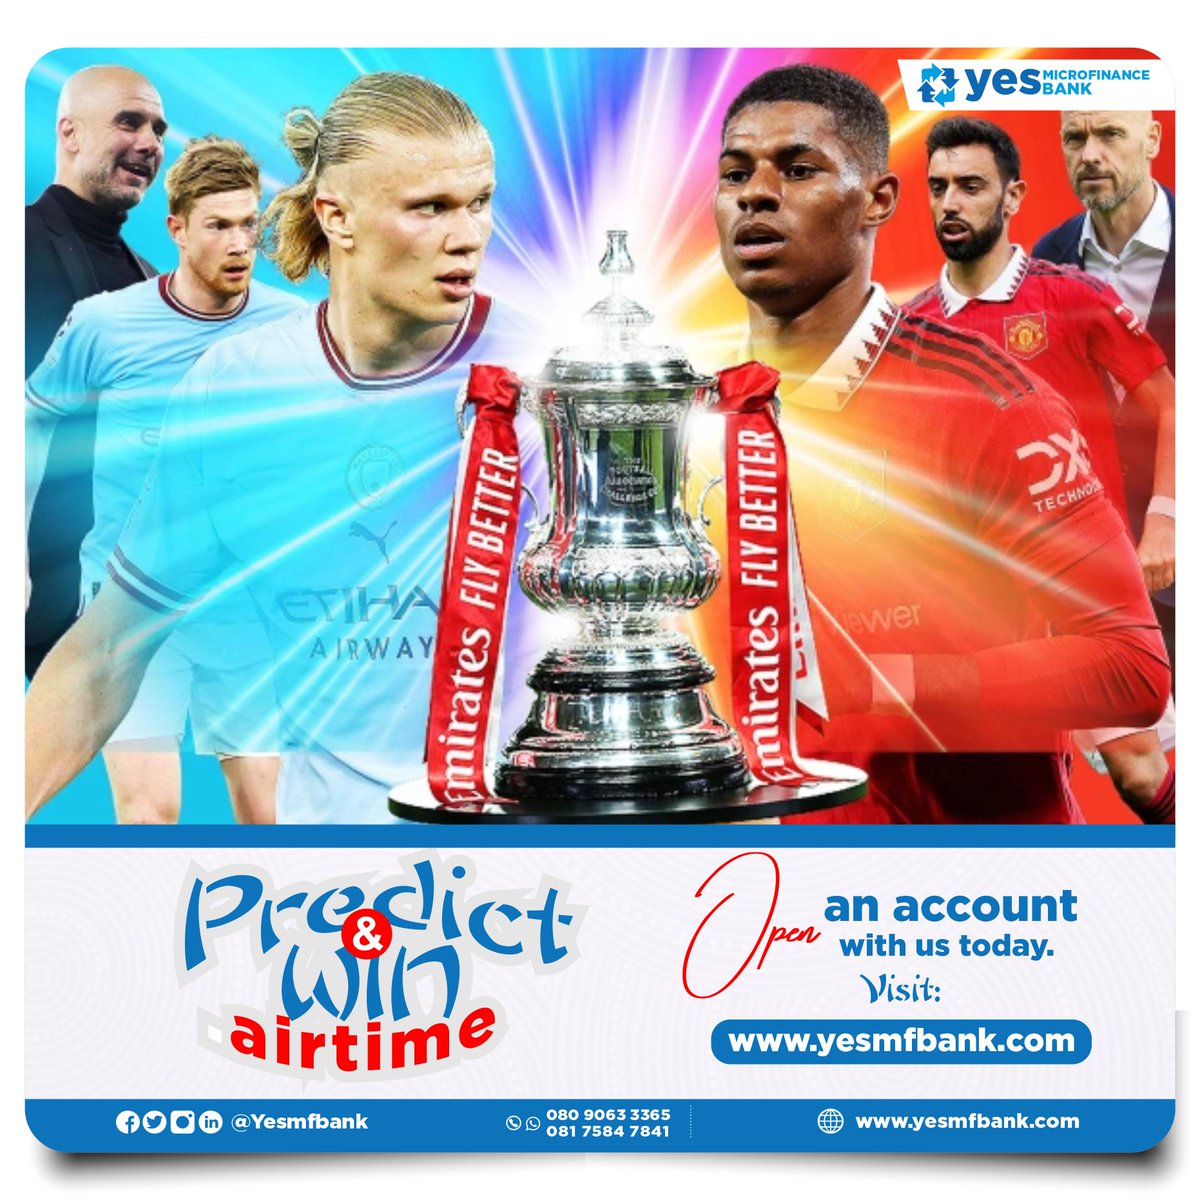 Be 1 of the first 3 to predict the score correctly and win airtime.
Don't miss the match, pay your cable tv bills on your Yes Bank account. Open a Yes Bank account now!
Visit: yesmfbank.com   
Please share.
#yesmfbank #FACup #finalmatch #Football #share #mancityvsmanu